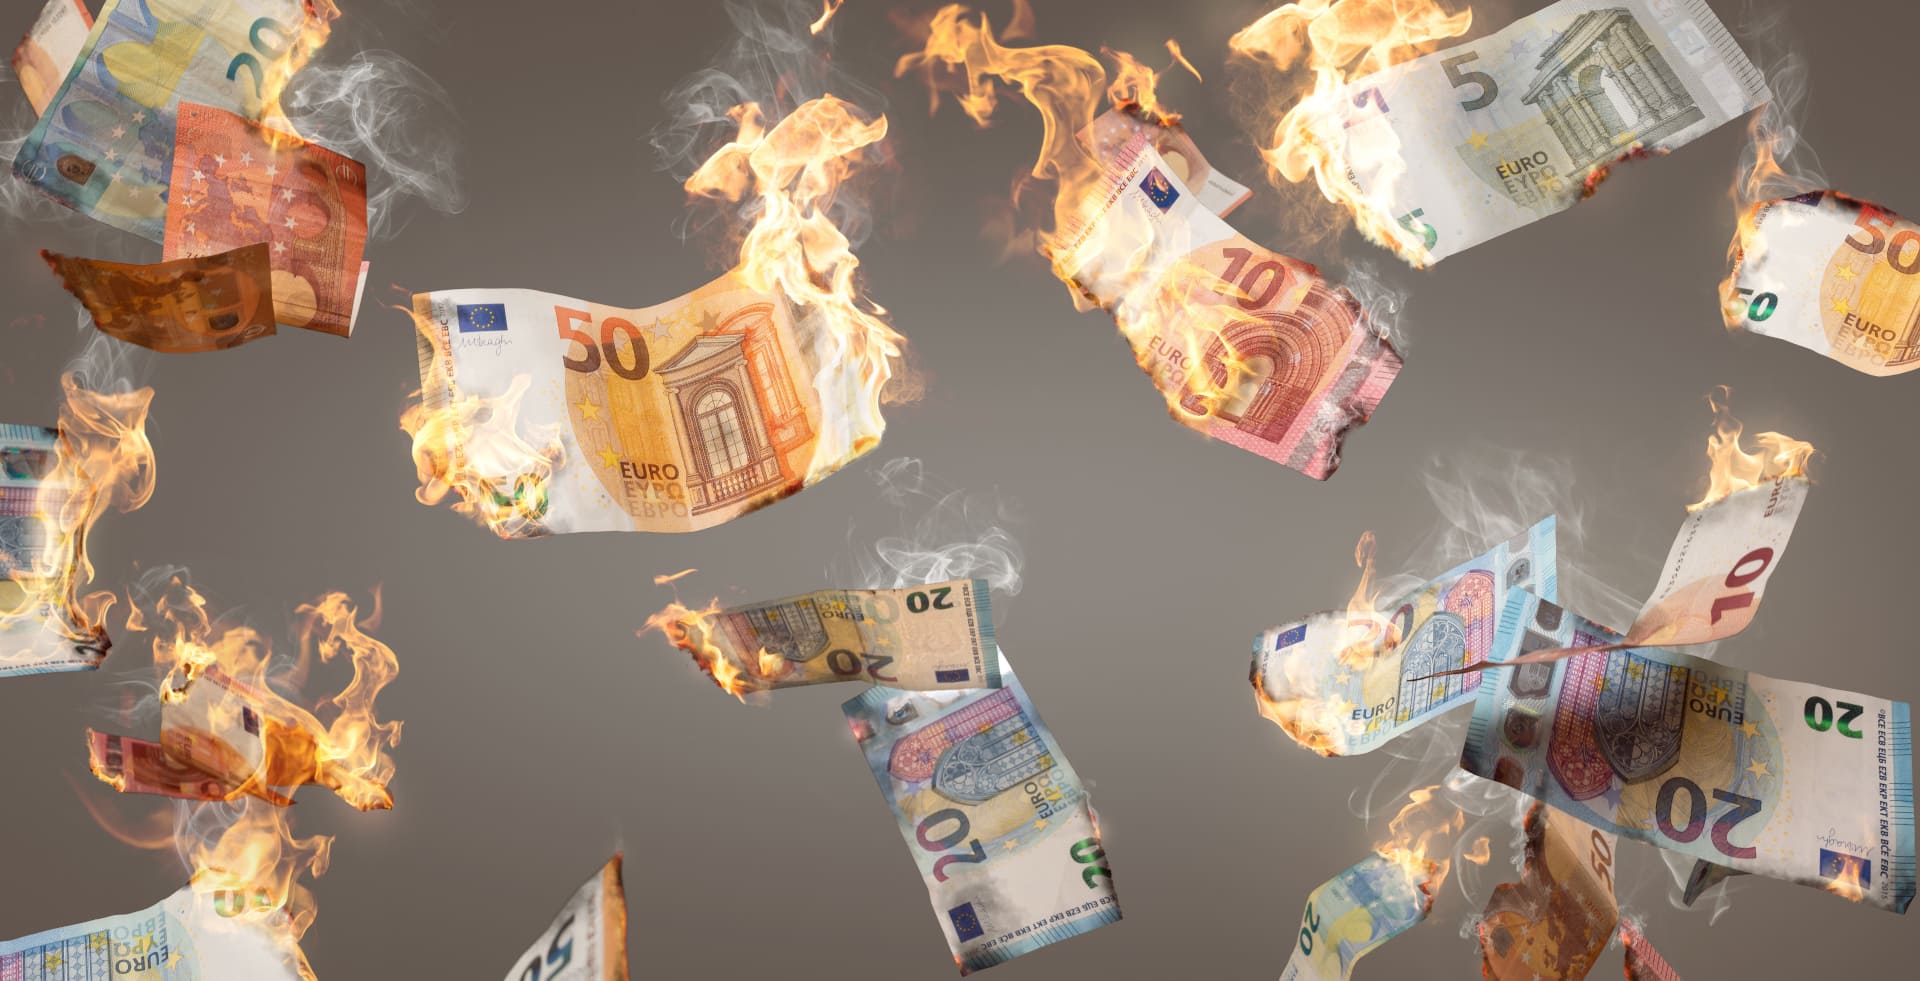 Varie banconote in euro in fiamme cadono